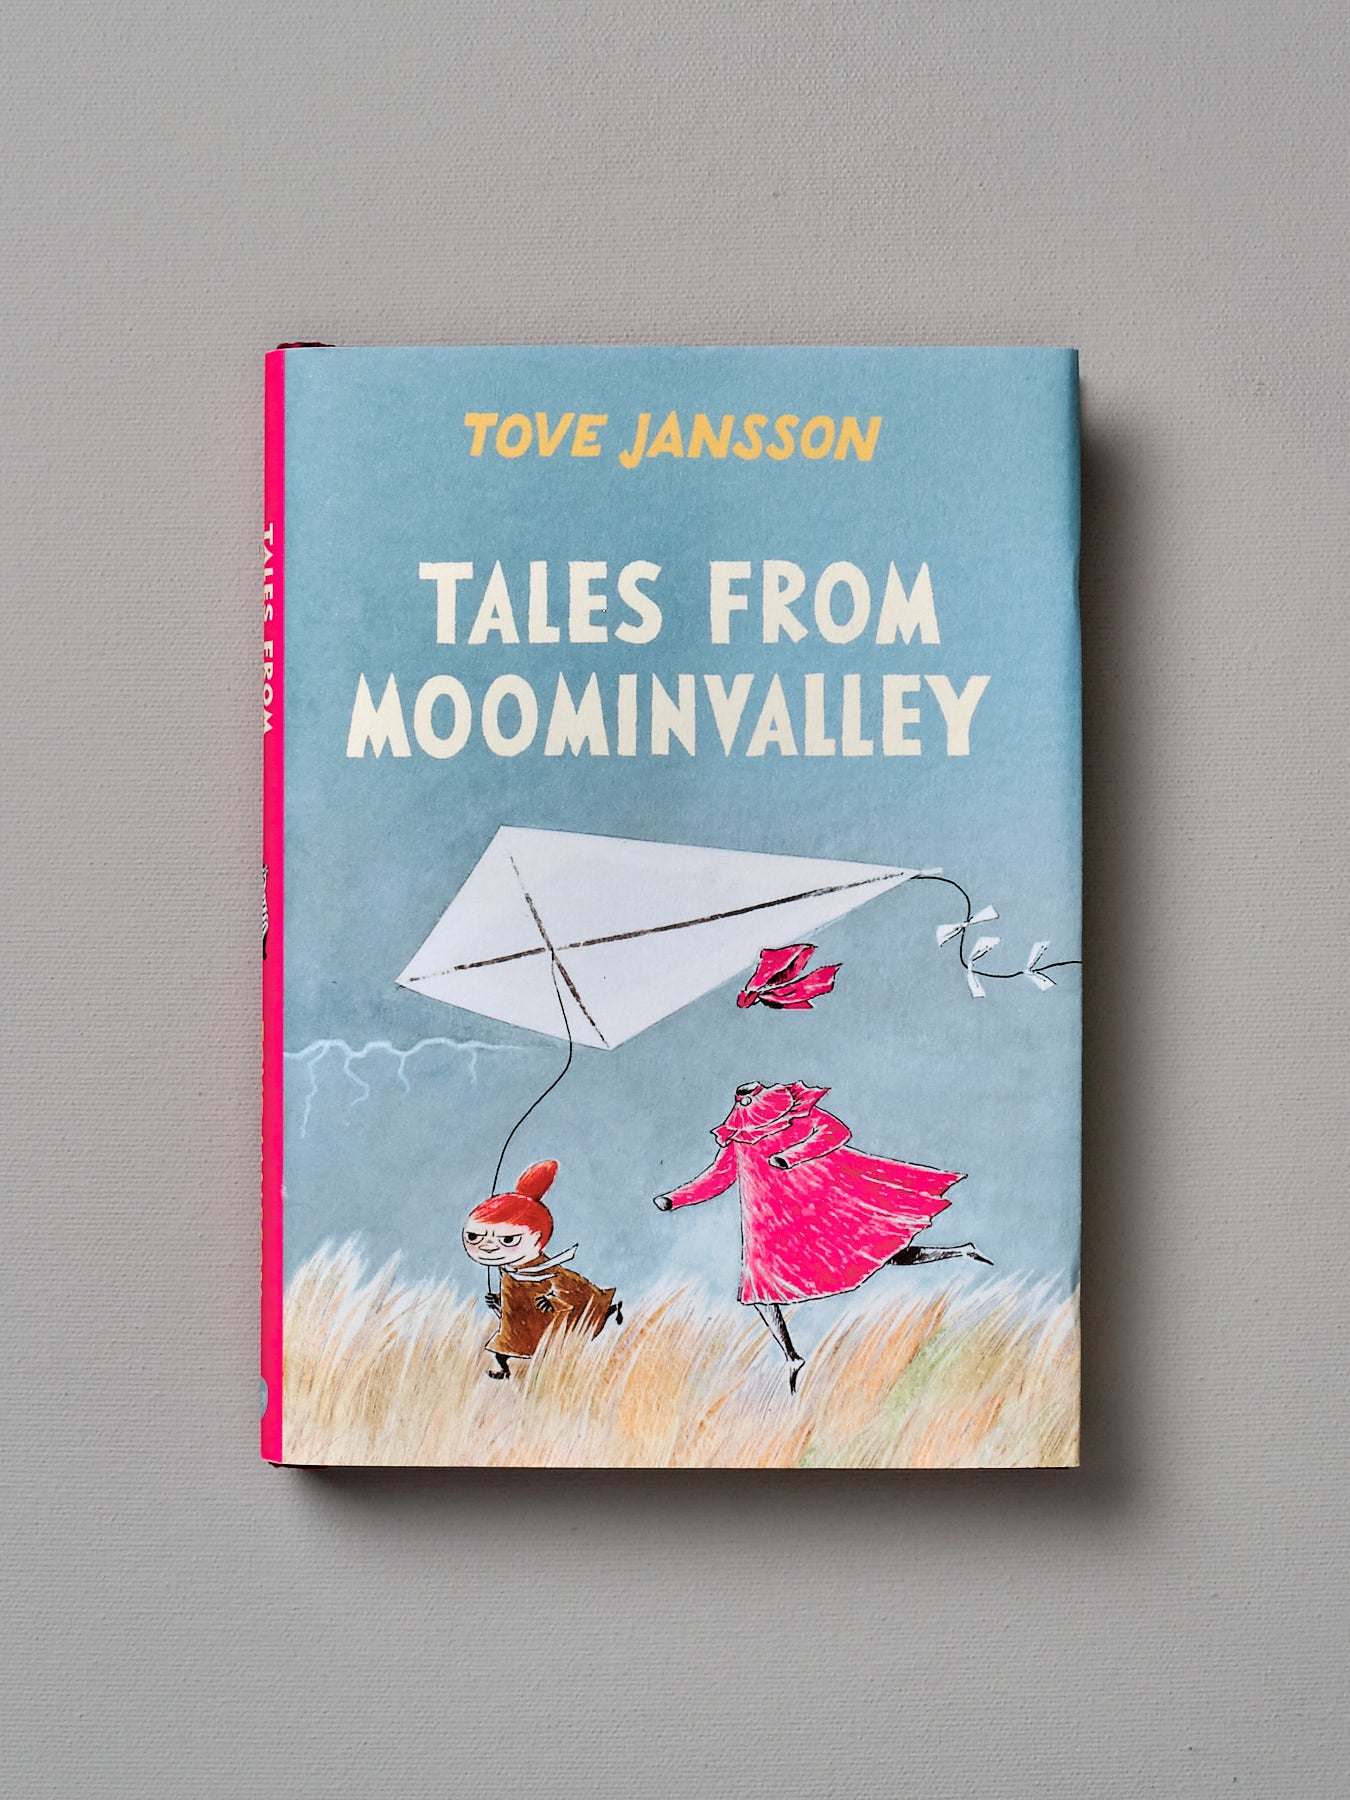 A book with the title Tales From Moominvalley by Tove Jansson.